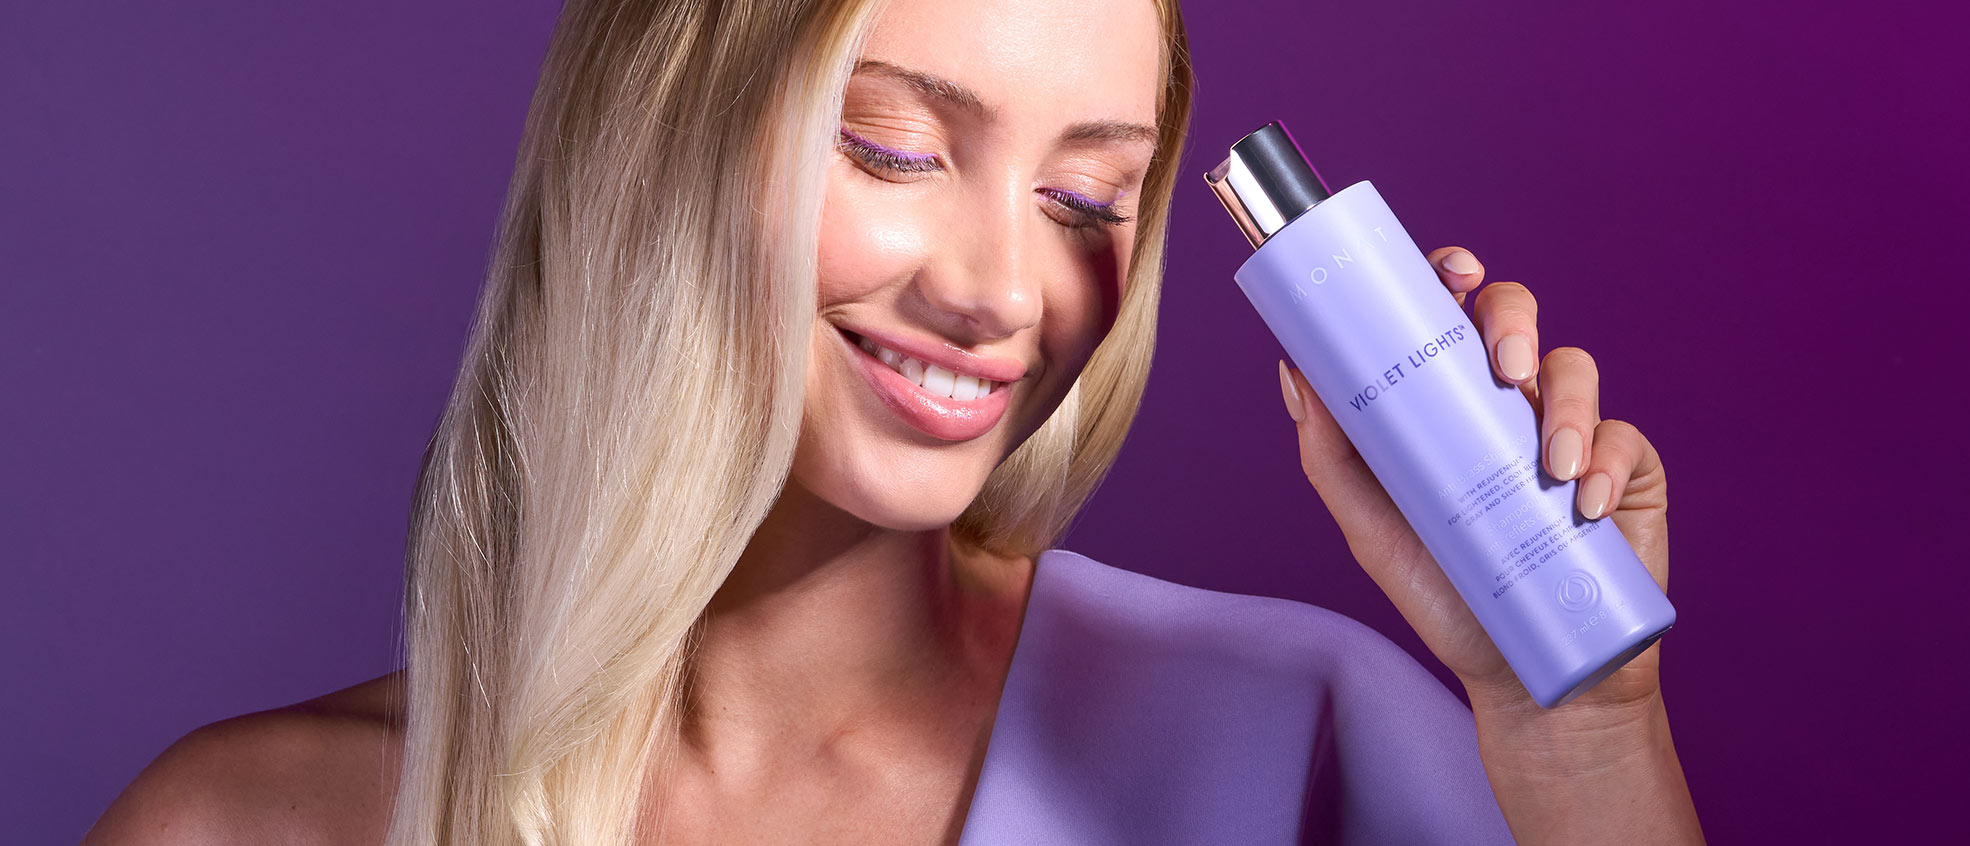 Blonde female smiling while holding Violet Lights™ Anti-Brass Shampoo in front of her face.